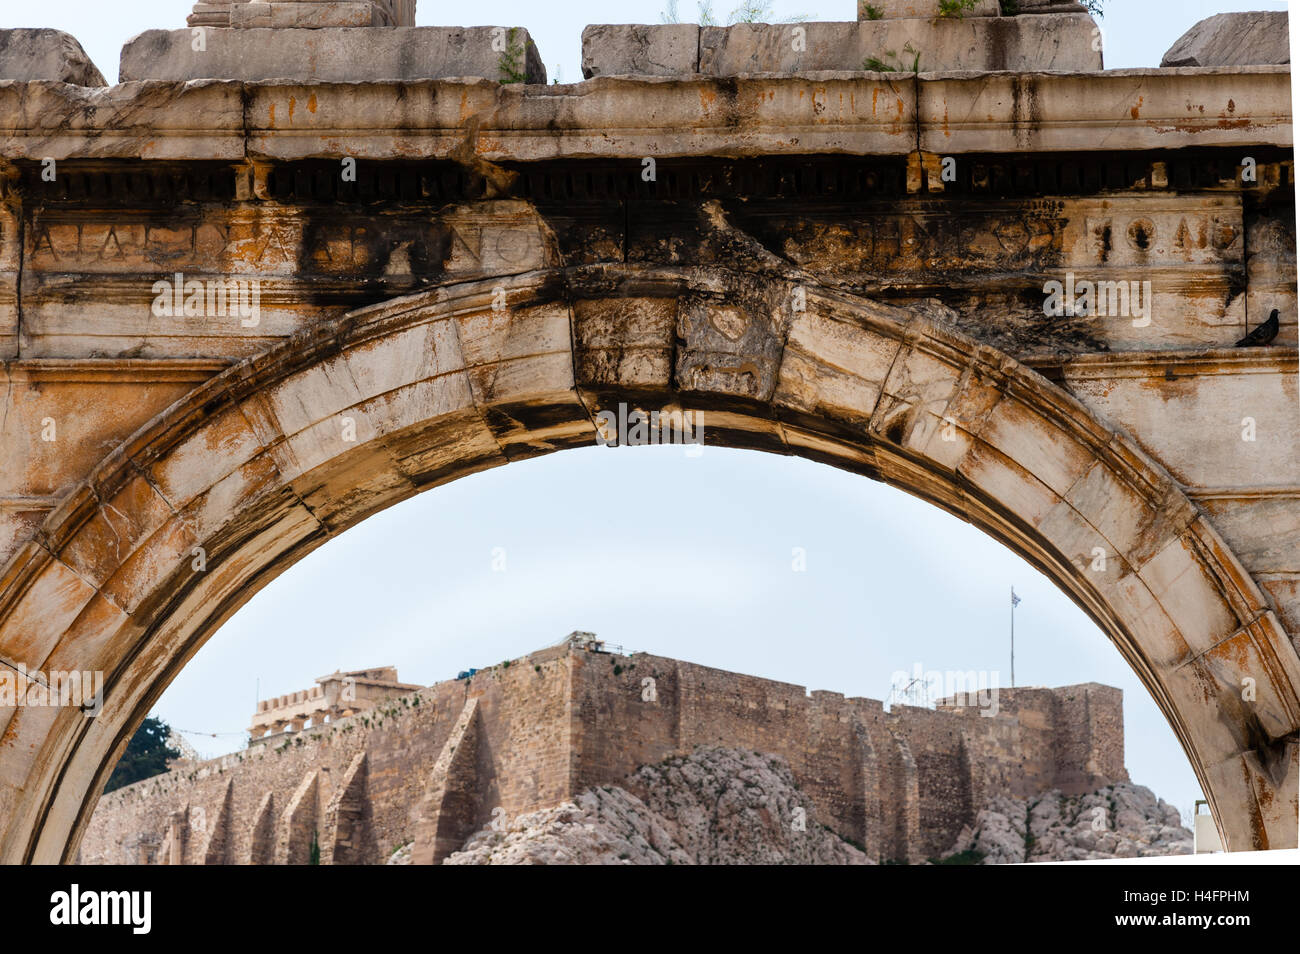 Athens, Greece. The Arch of Hadrian with Acropolis in the background. Stock Photo